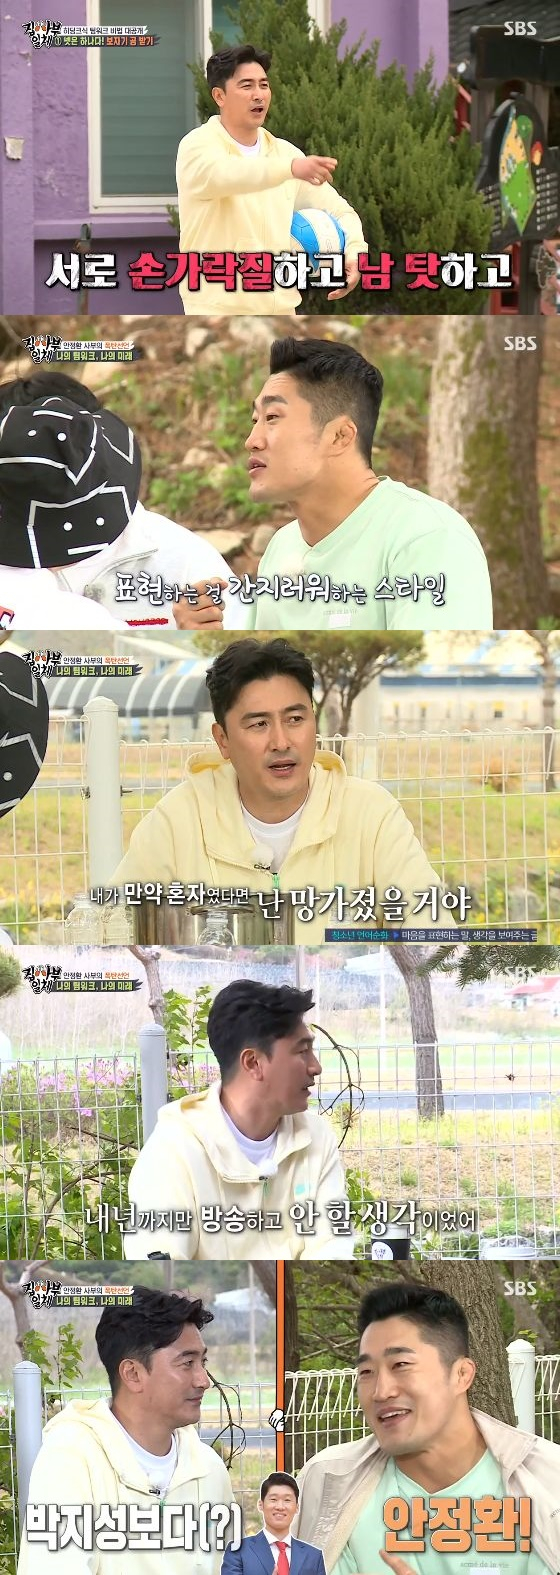 In the SBS entertainment program All The Butlers broadcasted on the 16th, Ahn Jung-hwans National Teamwork Training was drawn.Ahn Jung-hwan tied the members hands and provided Samgyetang meals for teamwork training.If I give up one, my colleague gets one, said Ahn Jung-hwan, who gave up his arm and ate Samgyetang.Kim Dong-Hyun, who has several programs with Ahn Jung-hwan, said, It is a style that takes care of everything behind.When someone goes to the hospital while playing soccer or basketball, he is the first person to go to the hospital. On the day of the show, Lee Seung-gi asked Ahn Jung-hwan about the person with the best teamwork among entertainment partners.Kim Sung-joo says that I like teamwork, I do not like it, said Ahn Jung-hwan. I am a better partner than my first impression.The first impression was not good, the more I knew, the more I was in the real world, said Ahn Jung-hwan.That was the best teamwork then, Ahn Jung-hwan recalled of the 2002 World Cup.Ahn Jung-hwan said, The candidates sitting on the bench are very sick.However, there was no one who impressed me when I reflected the camera. I recalled the time when I made a semi-finals with self-sacrifice and teamwork.The teamwork was good for both the players, the fans and the people, he said.Lee Seung-gi said: There is a speciality with the name of Ahn Jung-hwan: if Park Ji-sung is a hero, then Ahn Jung-hwan is a star.Ahn Jung-hwan appealed, Why do I come out and talk about Park Ji-sung?When the members were embarrassed, Ahn Jung-hwan said, Cha Bum-geun, Park Ji-sung are all good seniors and brothers.Son Heung-min also laughed at the fact that he was Hung-mins brother.Meanwhile, Ahn Jung-hwan said, My family life is also a teamwork; Mrs. Lee (Mrs.) is the leader; every time I do something wrong, my position changes.If I did not marry, I would have lived a corrupt life. There was too much temptation in the growing environment, Confessions said.I was originally going to broadcast and rest until next year, said Ahn Jung-hwan, who made the bomb remarks about future plans; the cast, as well as the production crew, were sulking.I dont know whether to go towards football, add more study or add entertainment, its still a personal plan, said Ahn Jung-hwan.It is a waste of time to suddenly stop broadcasting now. I am better than four people.I will also study leaders, but I am worried about running the ground again. In the 1-to-4 penalty shoot-out with the members, Jean Ahn Jung-hwan said, There is no bigger player than the team. He finished the Ahn Jung-hwan ticket Spain national under-21 football team team team training warmly.